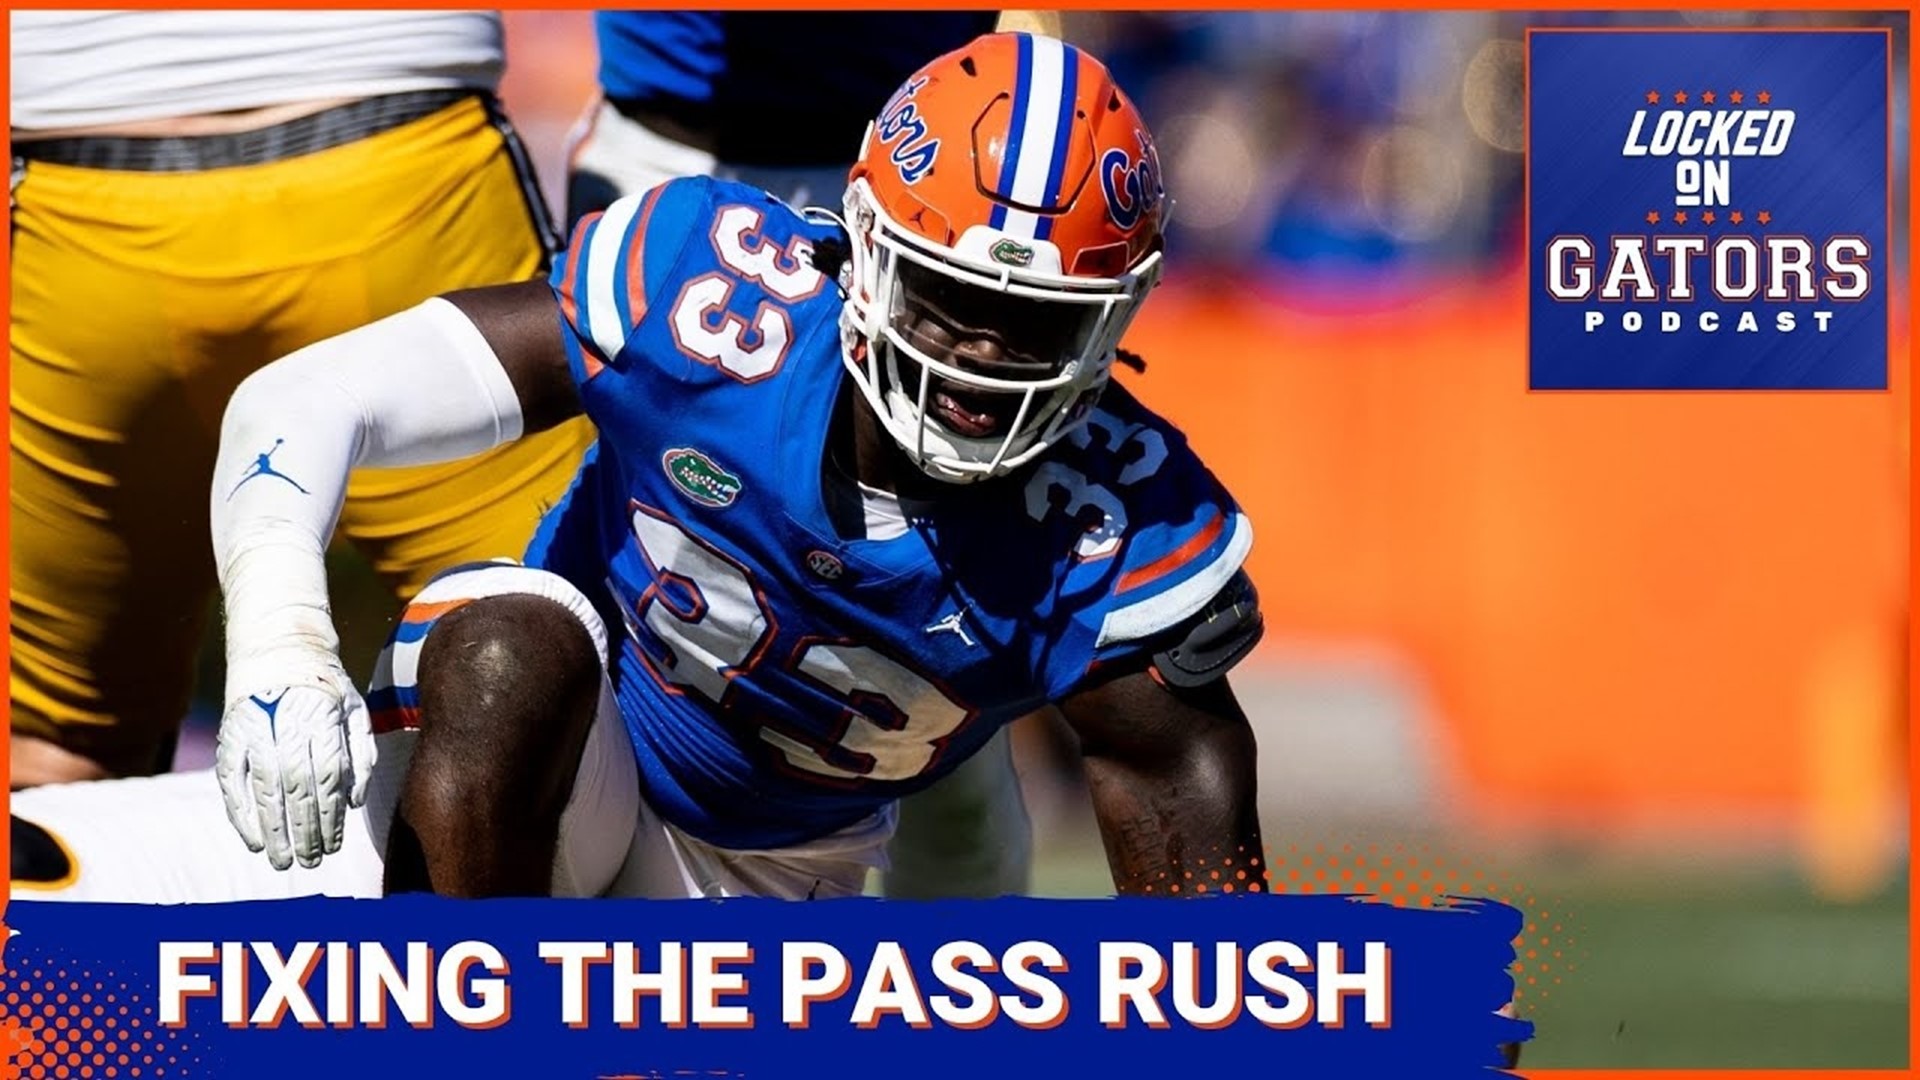 The Florida Gators football team had a pass-rush in 2022 that underwhelmed, but also brought new star edge rusher and jack linebacker Princely Umanmielen.